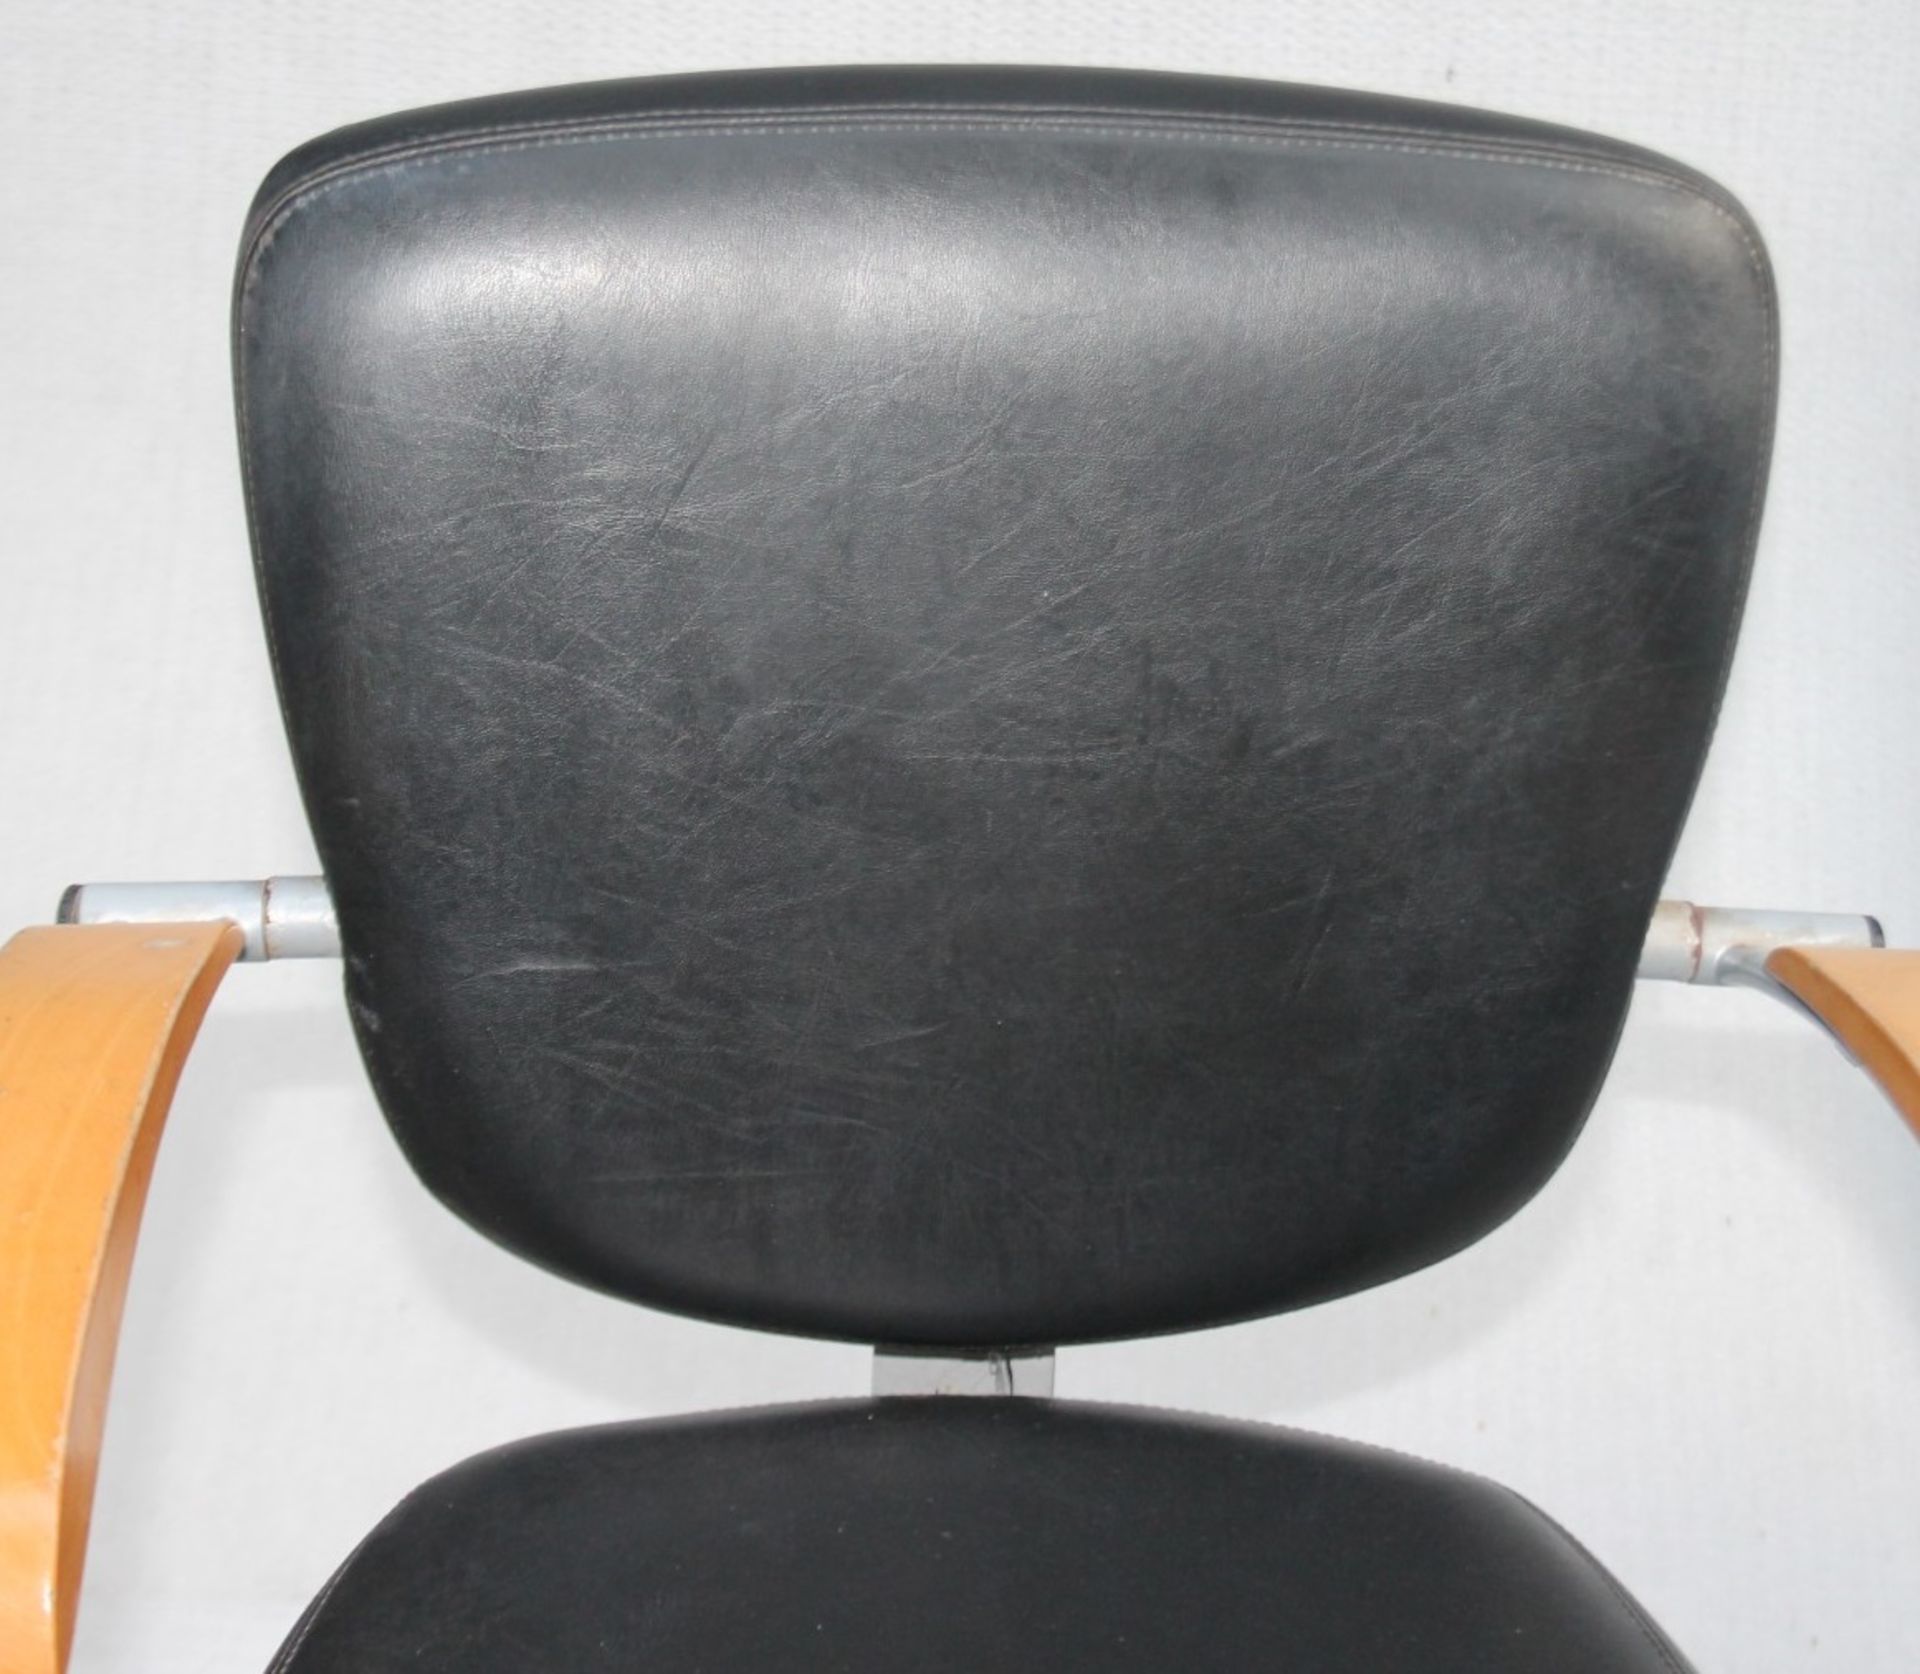 1 x Adjustable Black Hydraulic Barber Hairdressing Chair - Recently Removed From A Boutique Hair - Image 9 of 11